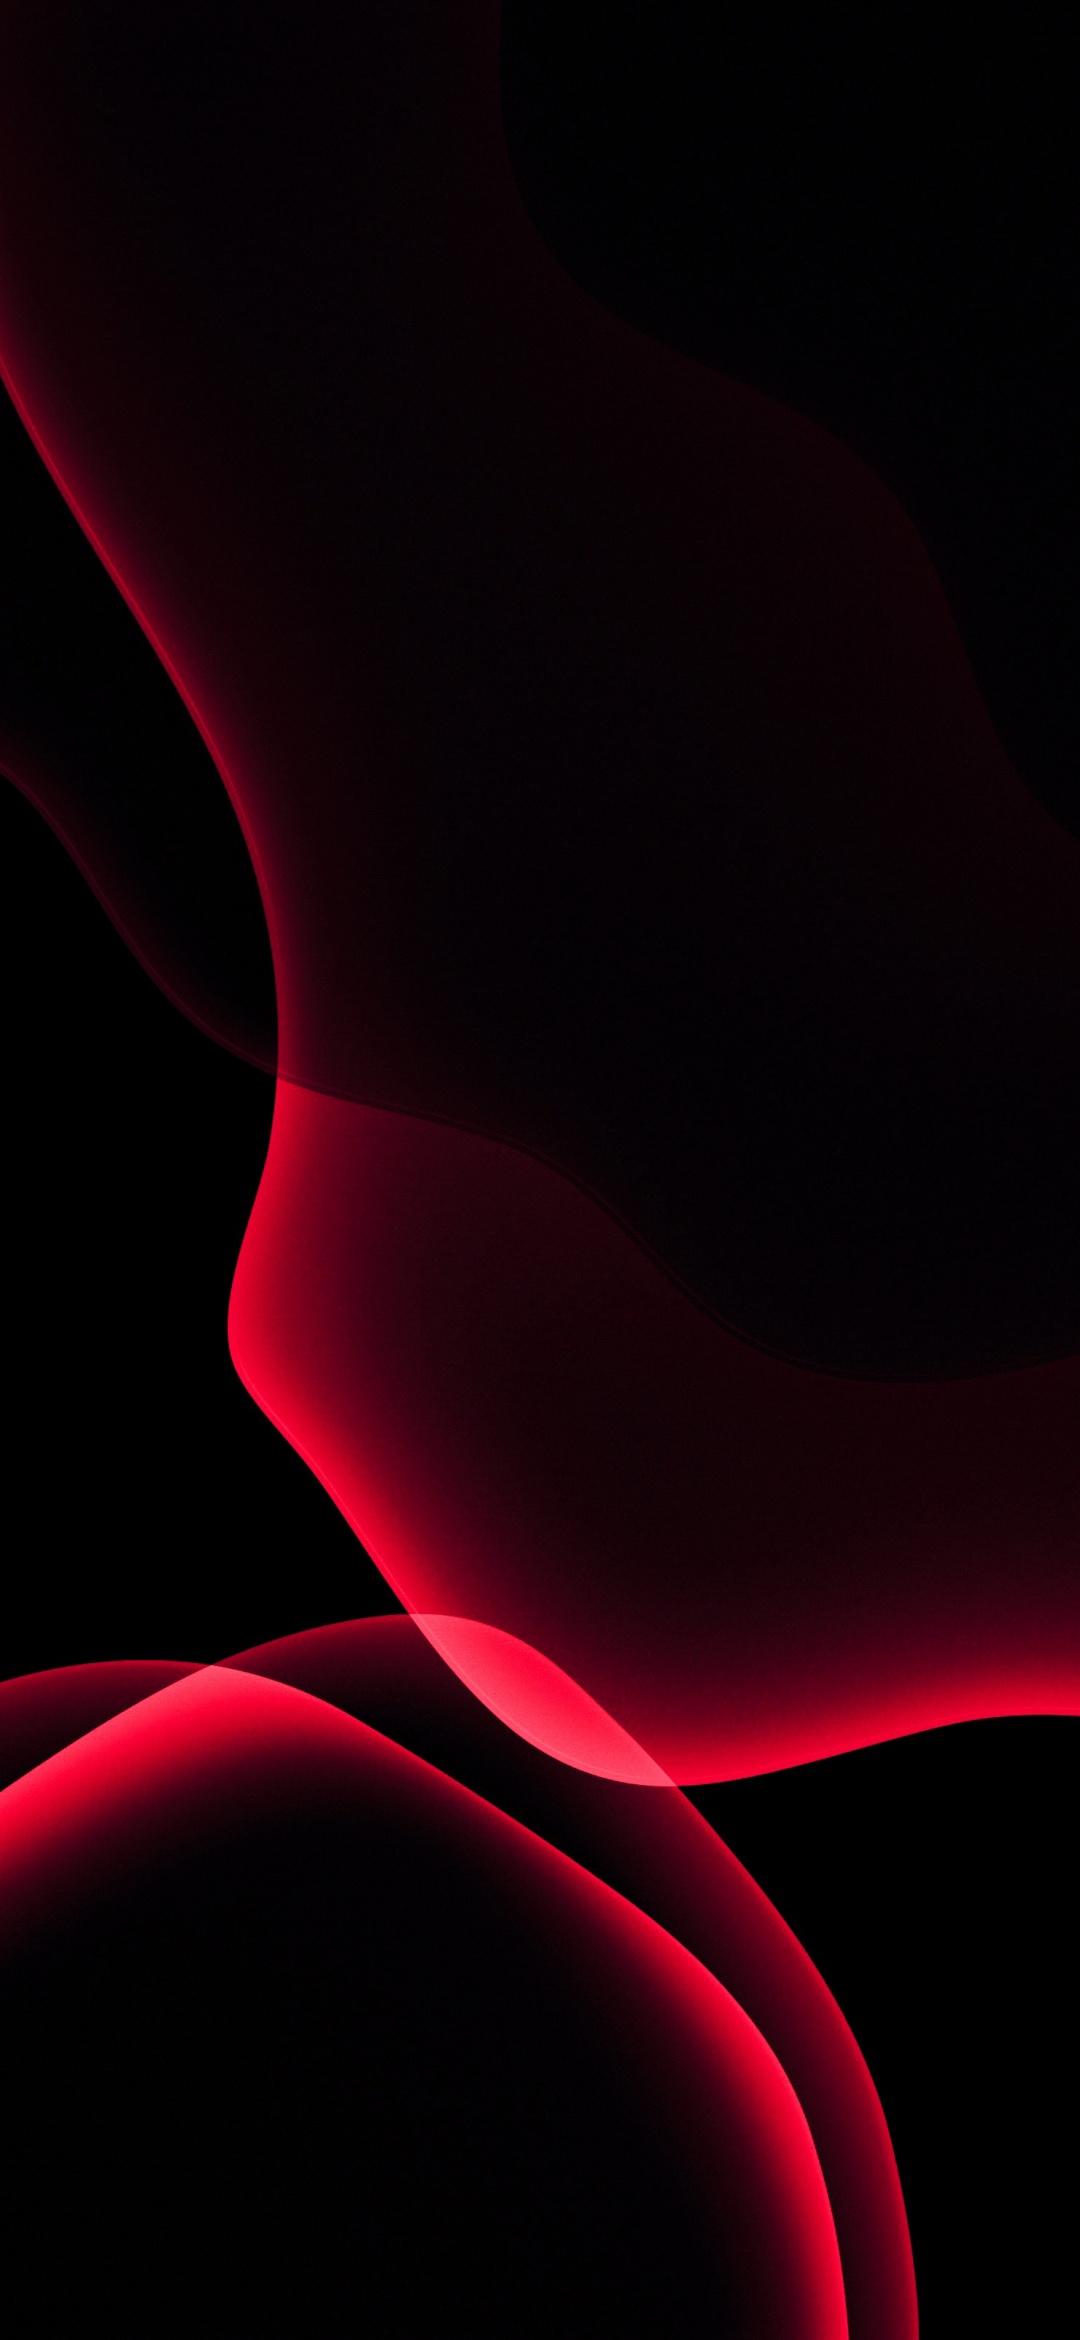 Download Black and Red Wallpaper 4K 1001apk for Android  apkdlin